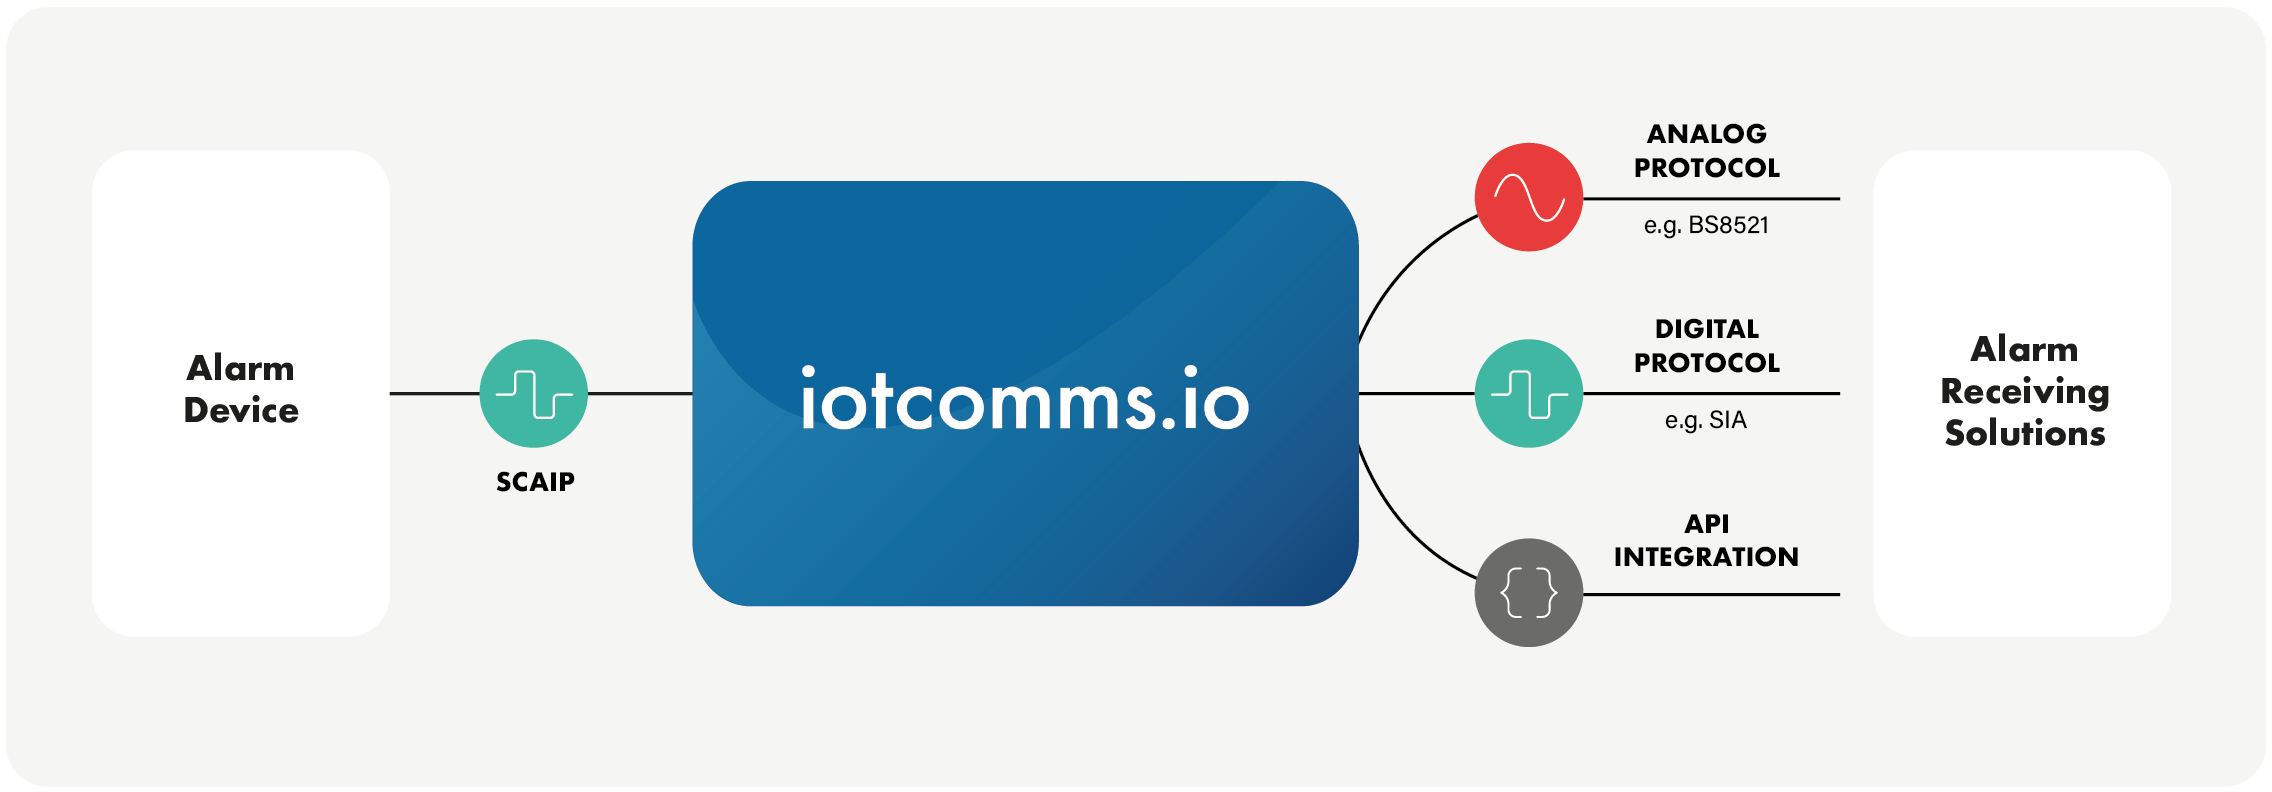 Make your alarm receiving solution SCAIP compliant ​with iotcomms.io